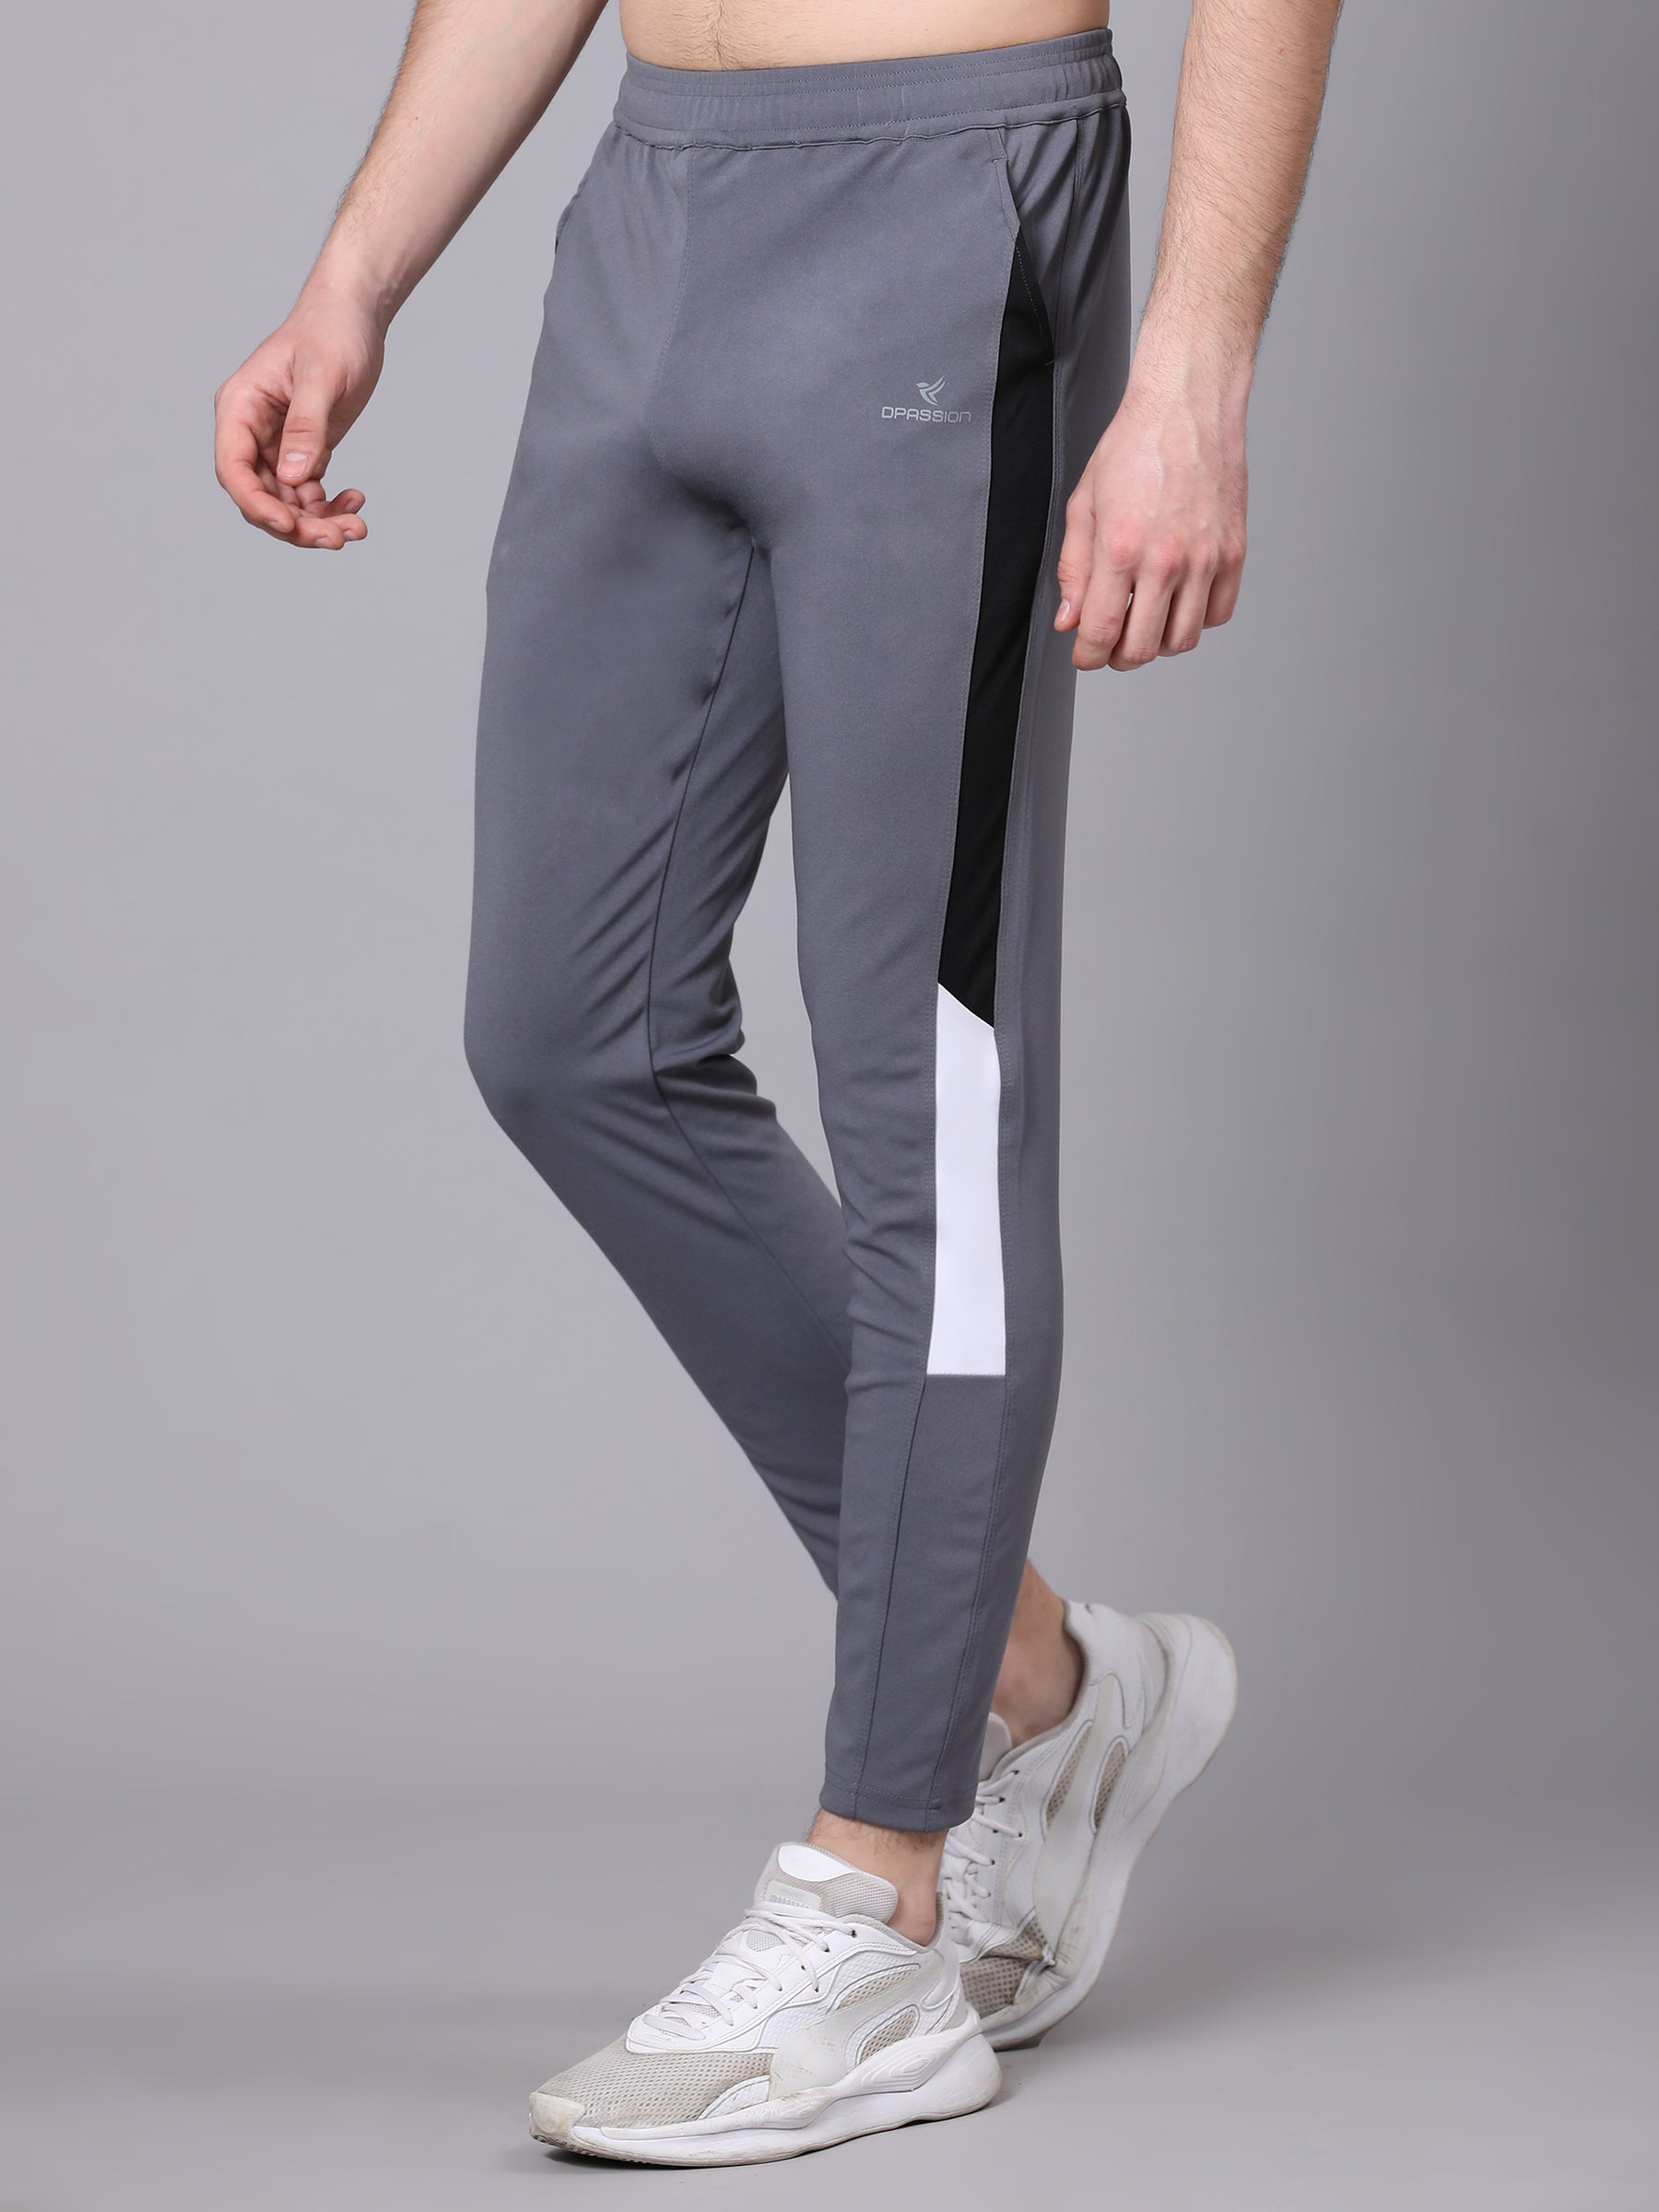 Buy Pepe Jeans Grey Cotton Lycra Trackpants for Men's Online @ Tata CLiQ